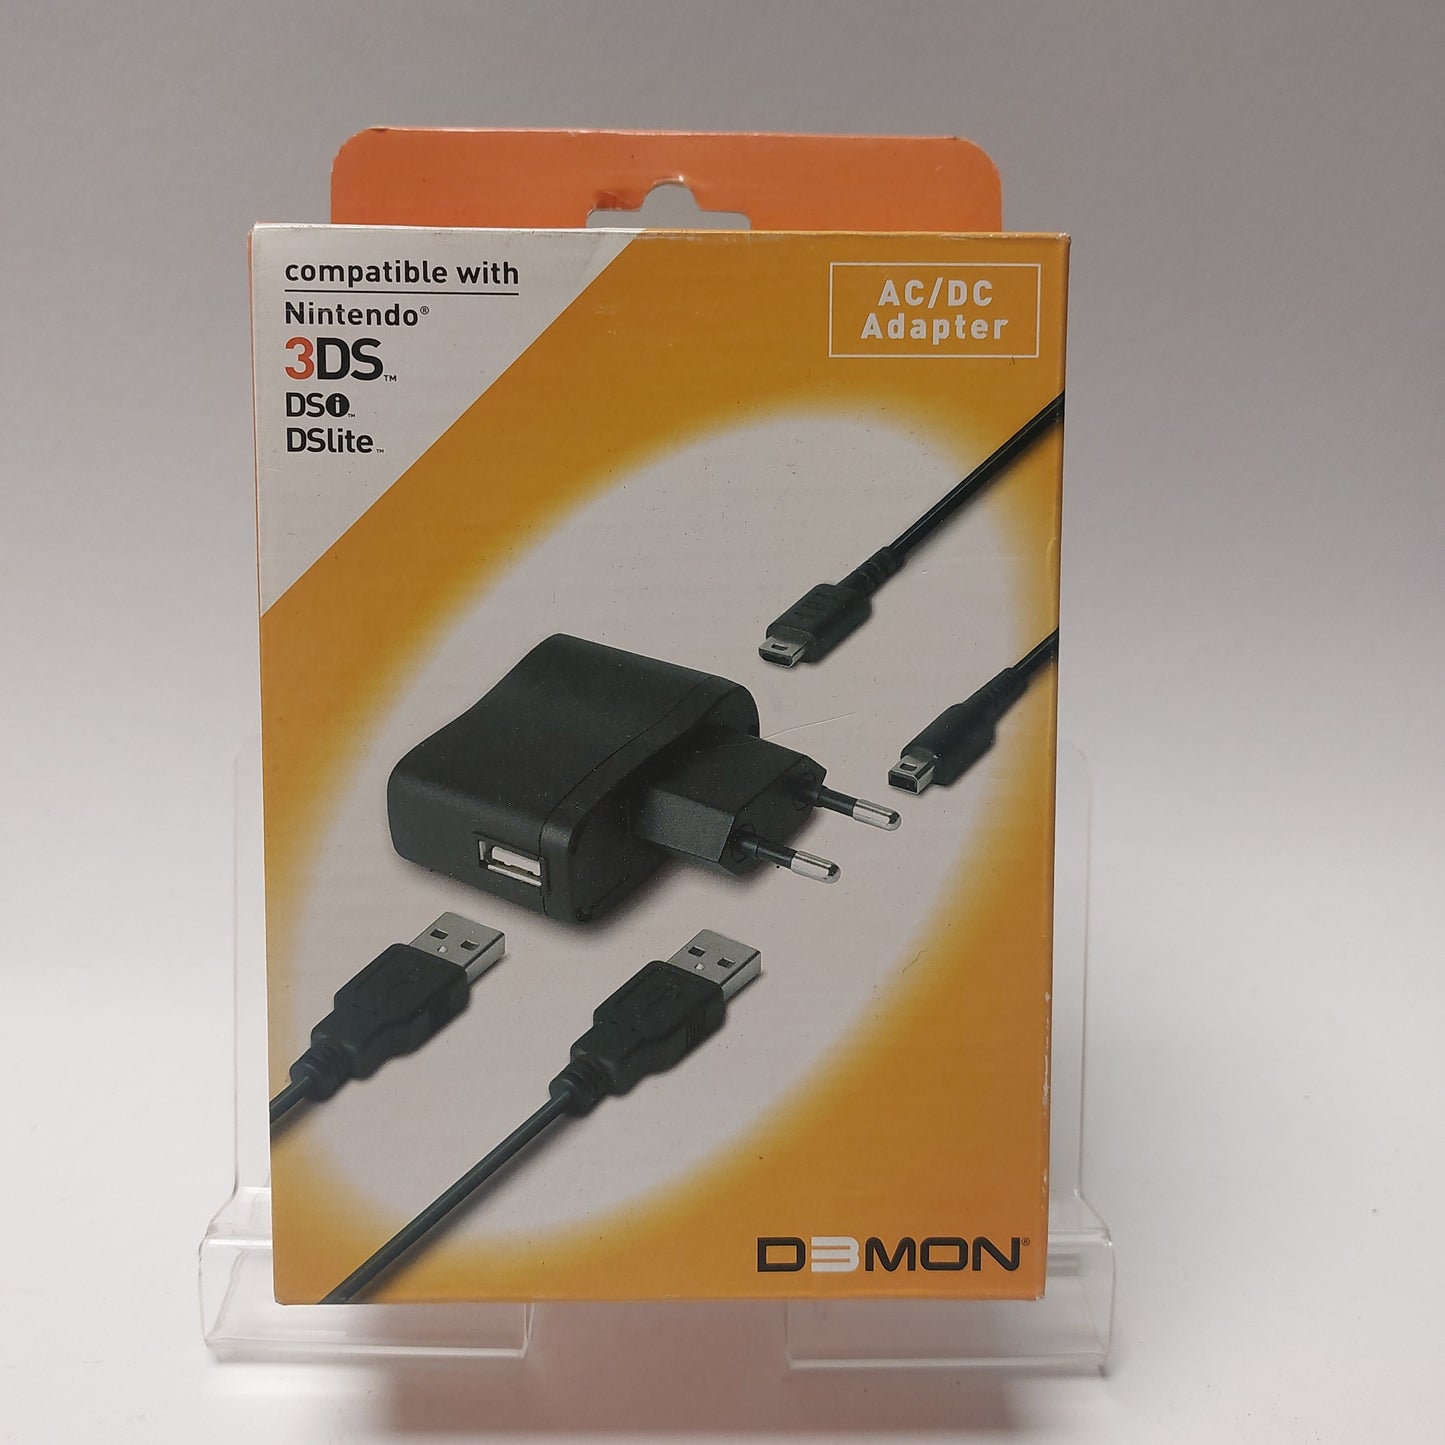 Compatible With Nintendo 3DS/DS/DS Lite AS/DC Adapter